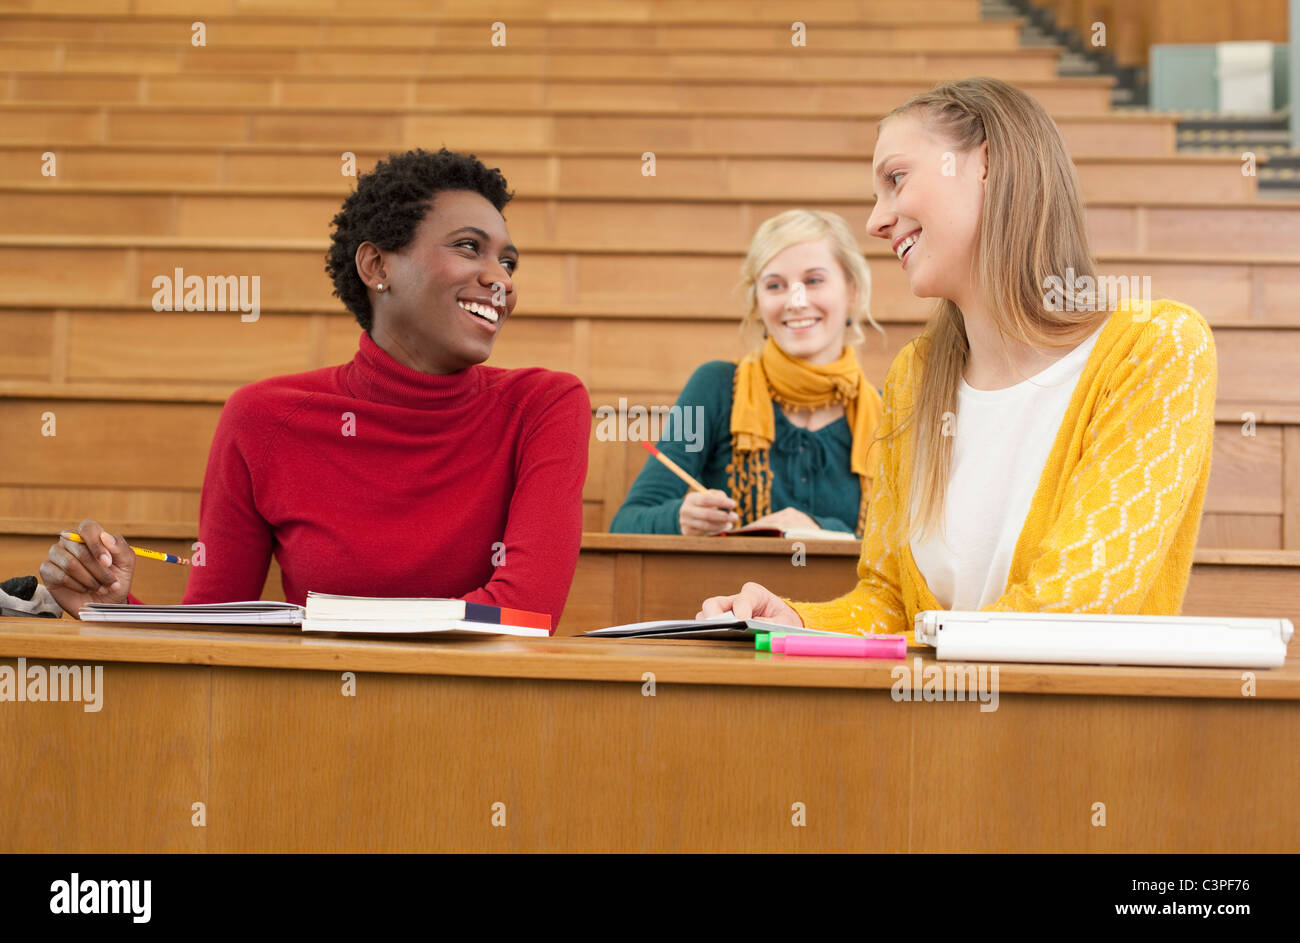 Germany, Leipzig, Students sitting and studying in auditorium, smiling Stock Photo